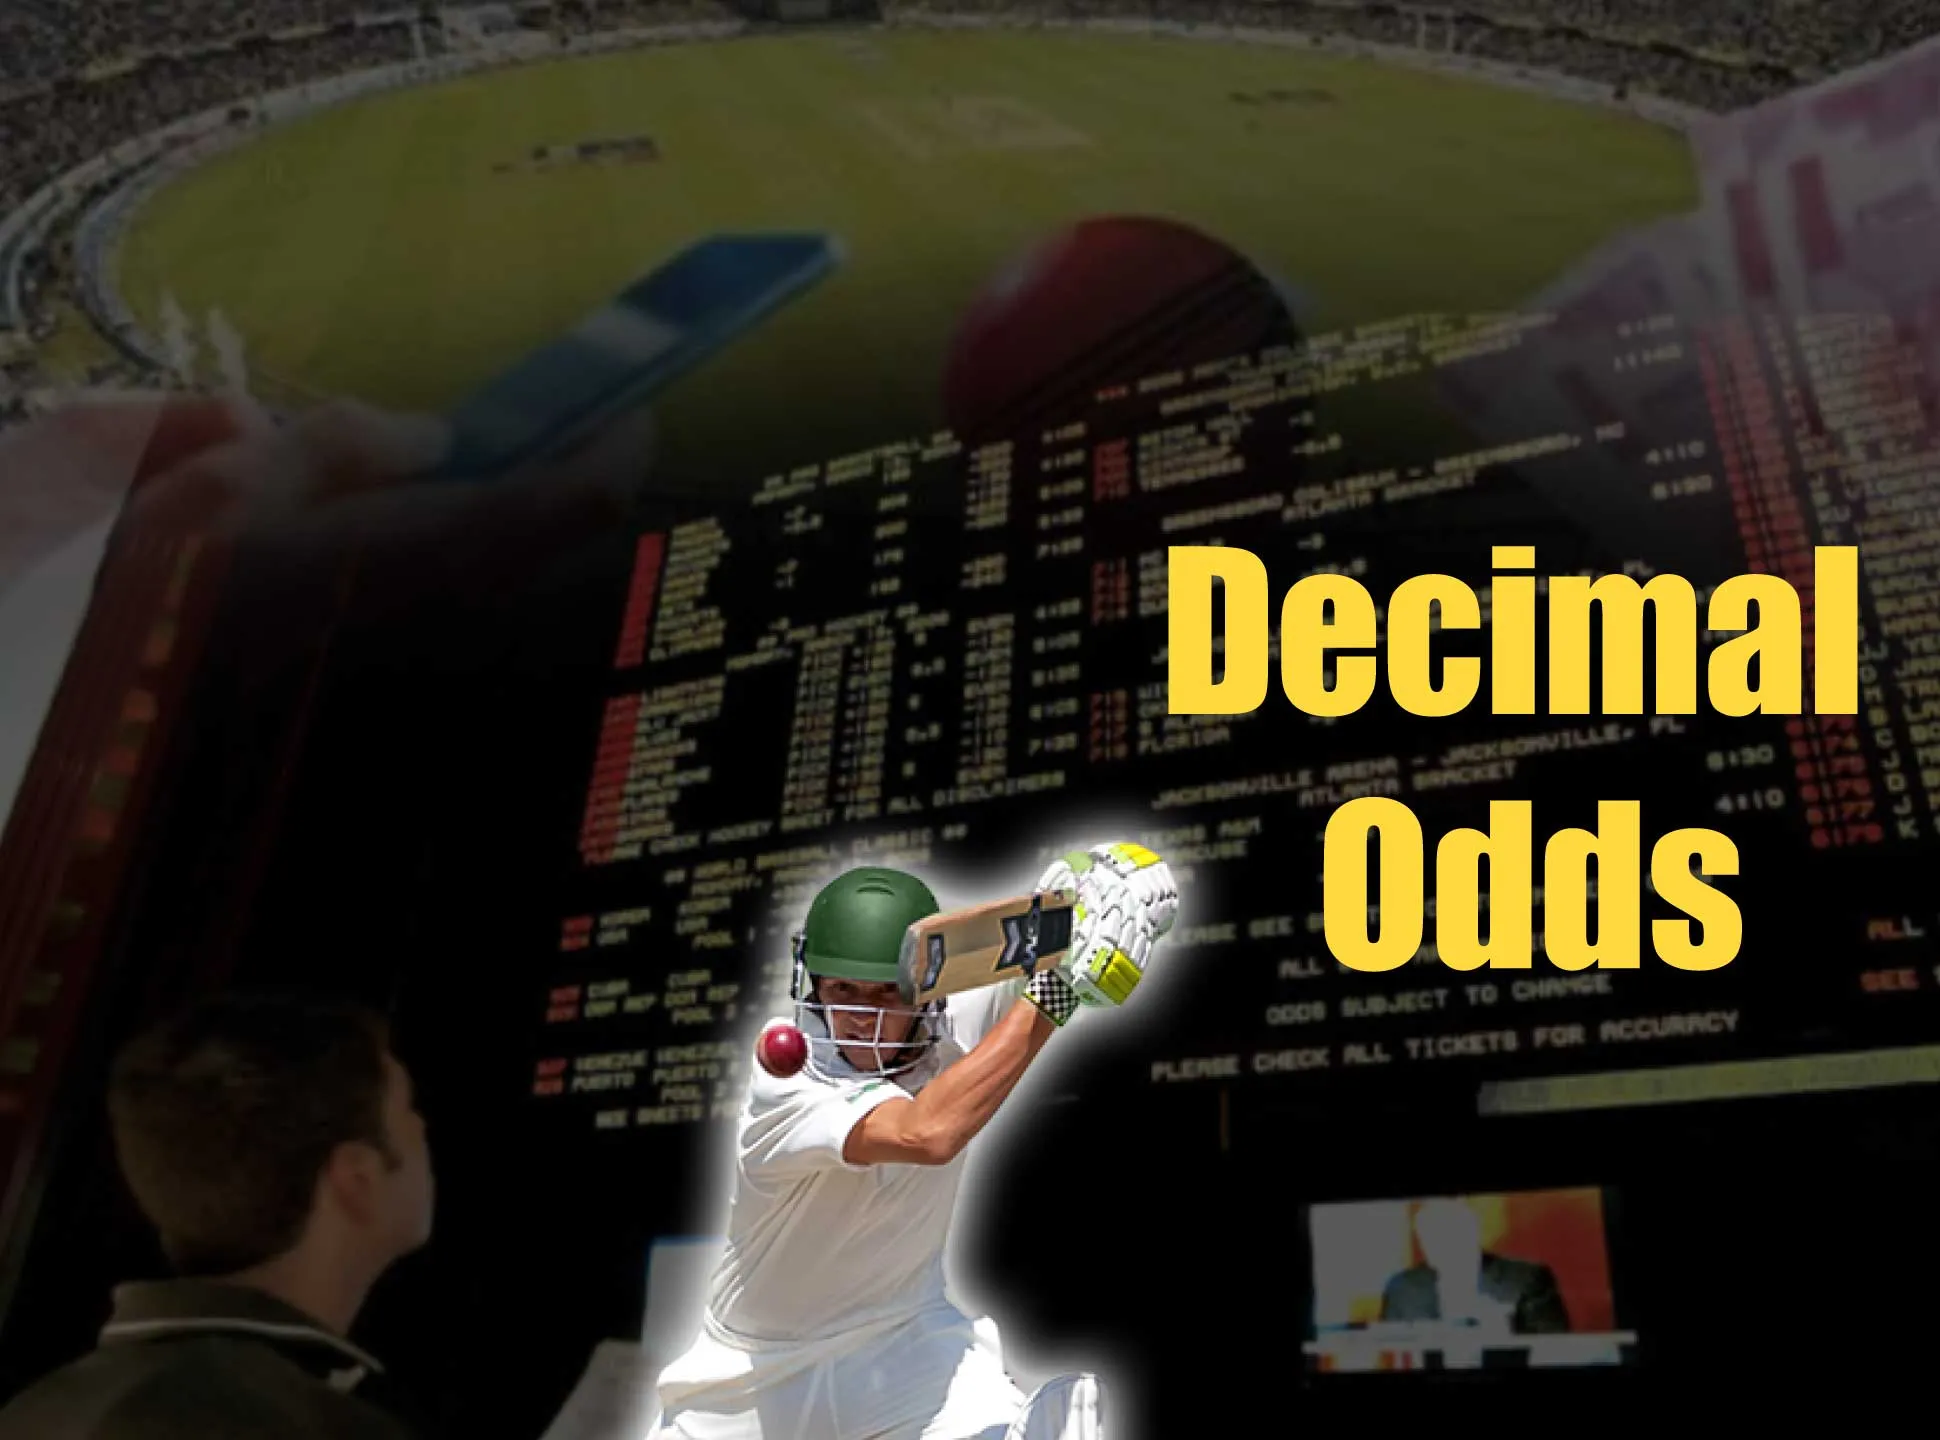 Decimal odds are common for IPL betting.